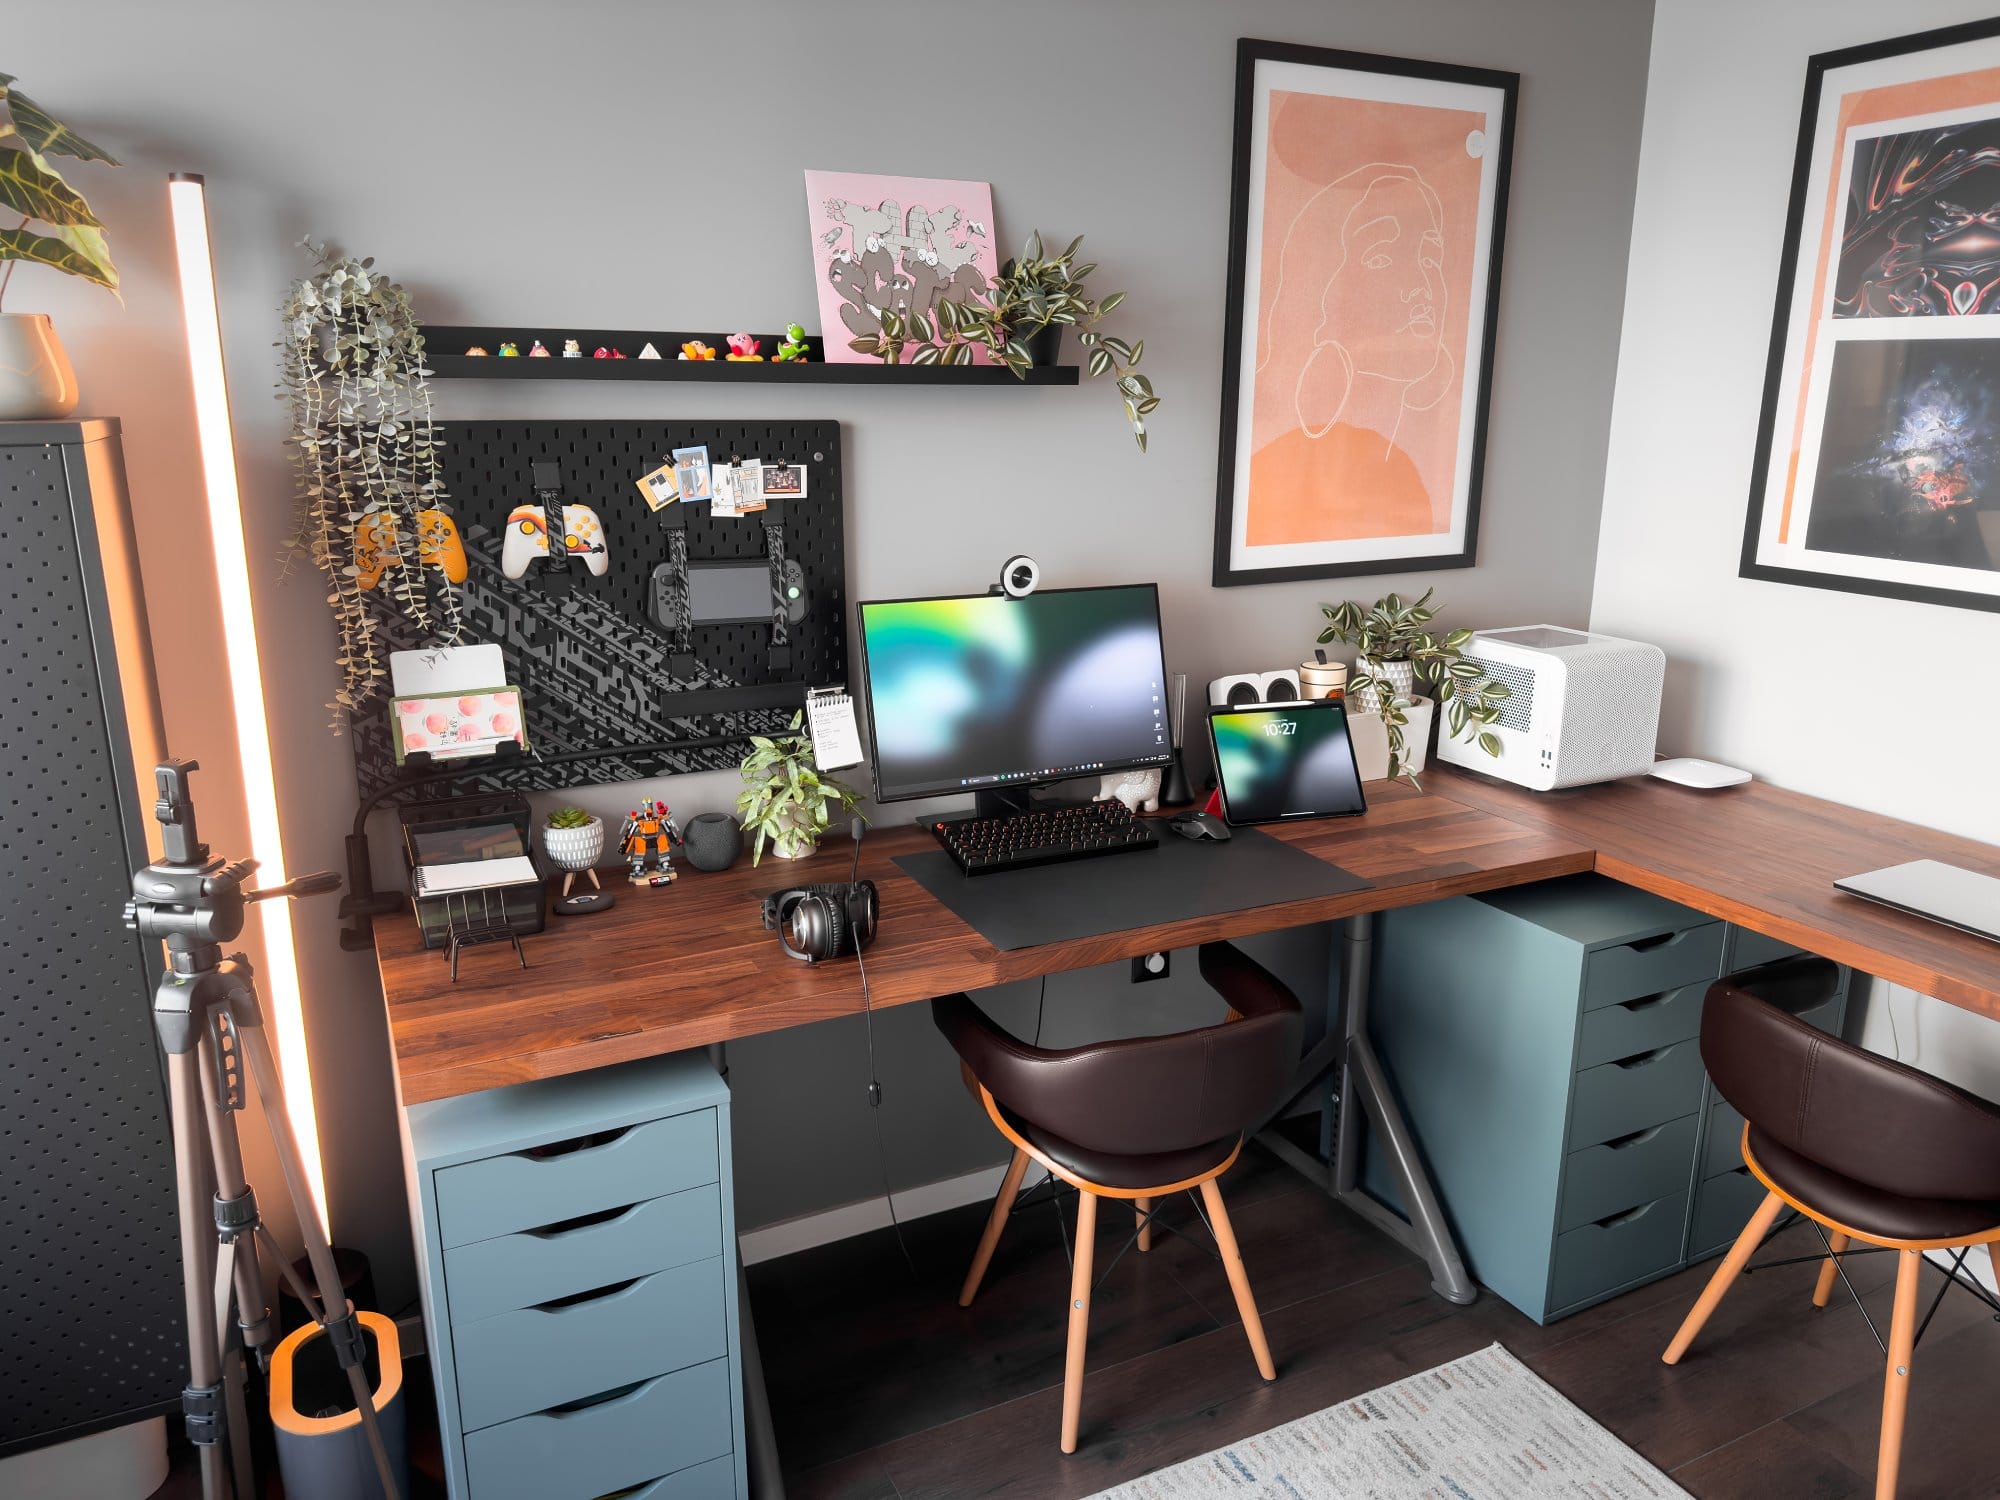 An L-shaped home office setup featuring a Dell monitor with Razer Kiyo webcam, Logitech G Pro keyboard and mouse, an iPad Pro 12.9 (3rd Gen), Logitech G Pro X headphones, and a printer, all arranged on a wooden IKEA KARLBY desk with IKEA ALEX drawers, complemented by plants, artwork, and an IKEA UPPSPEL pegboard